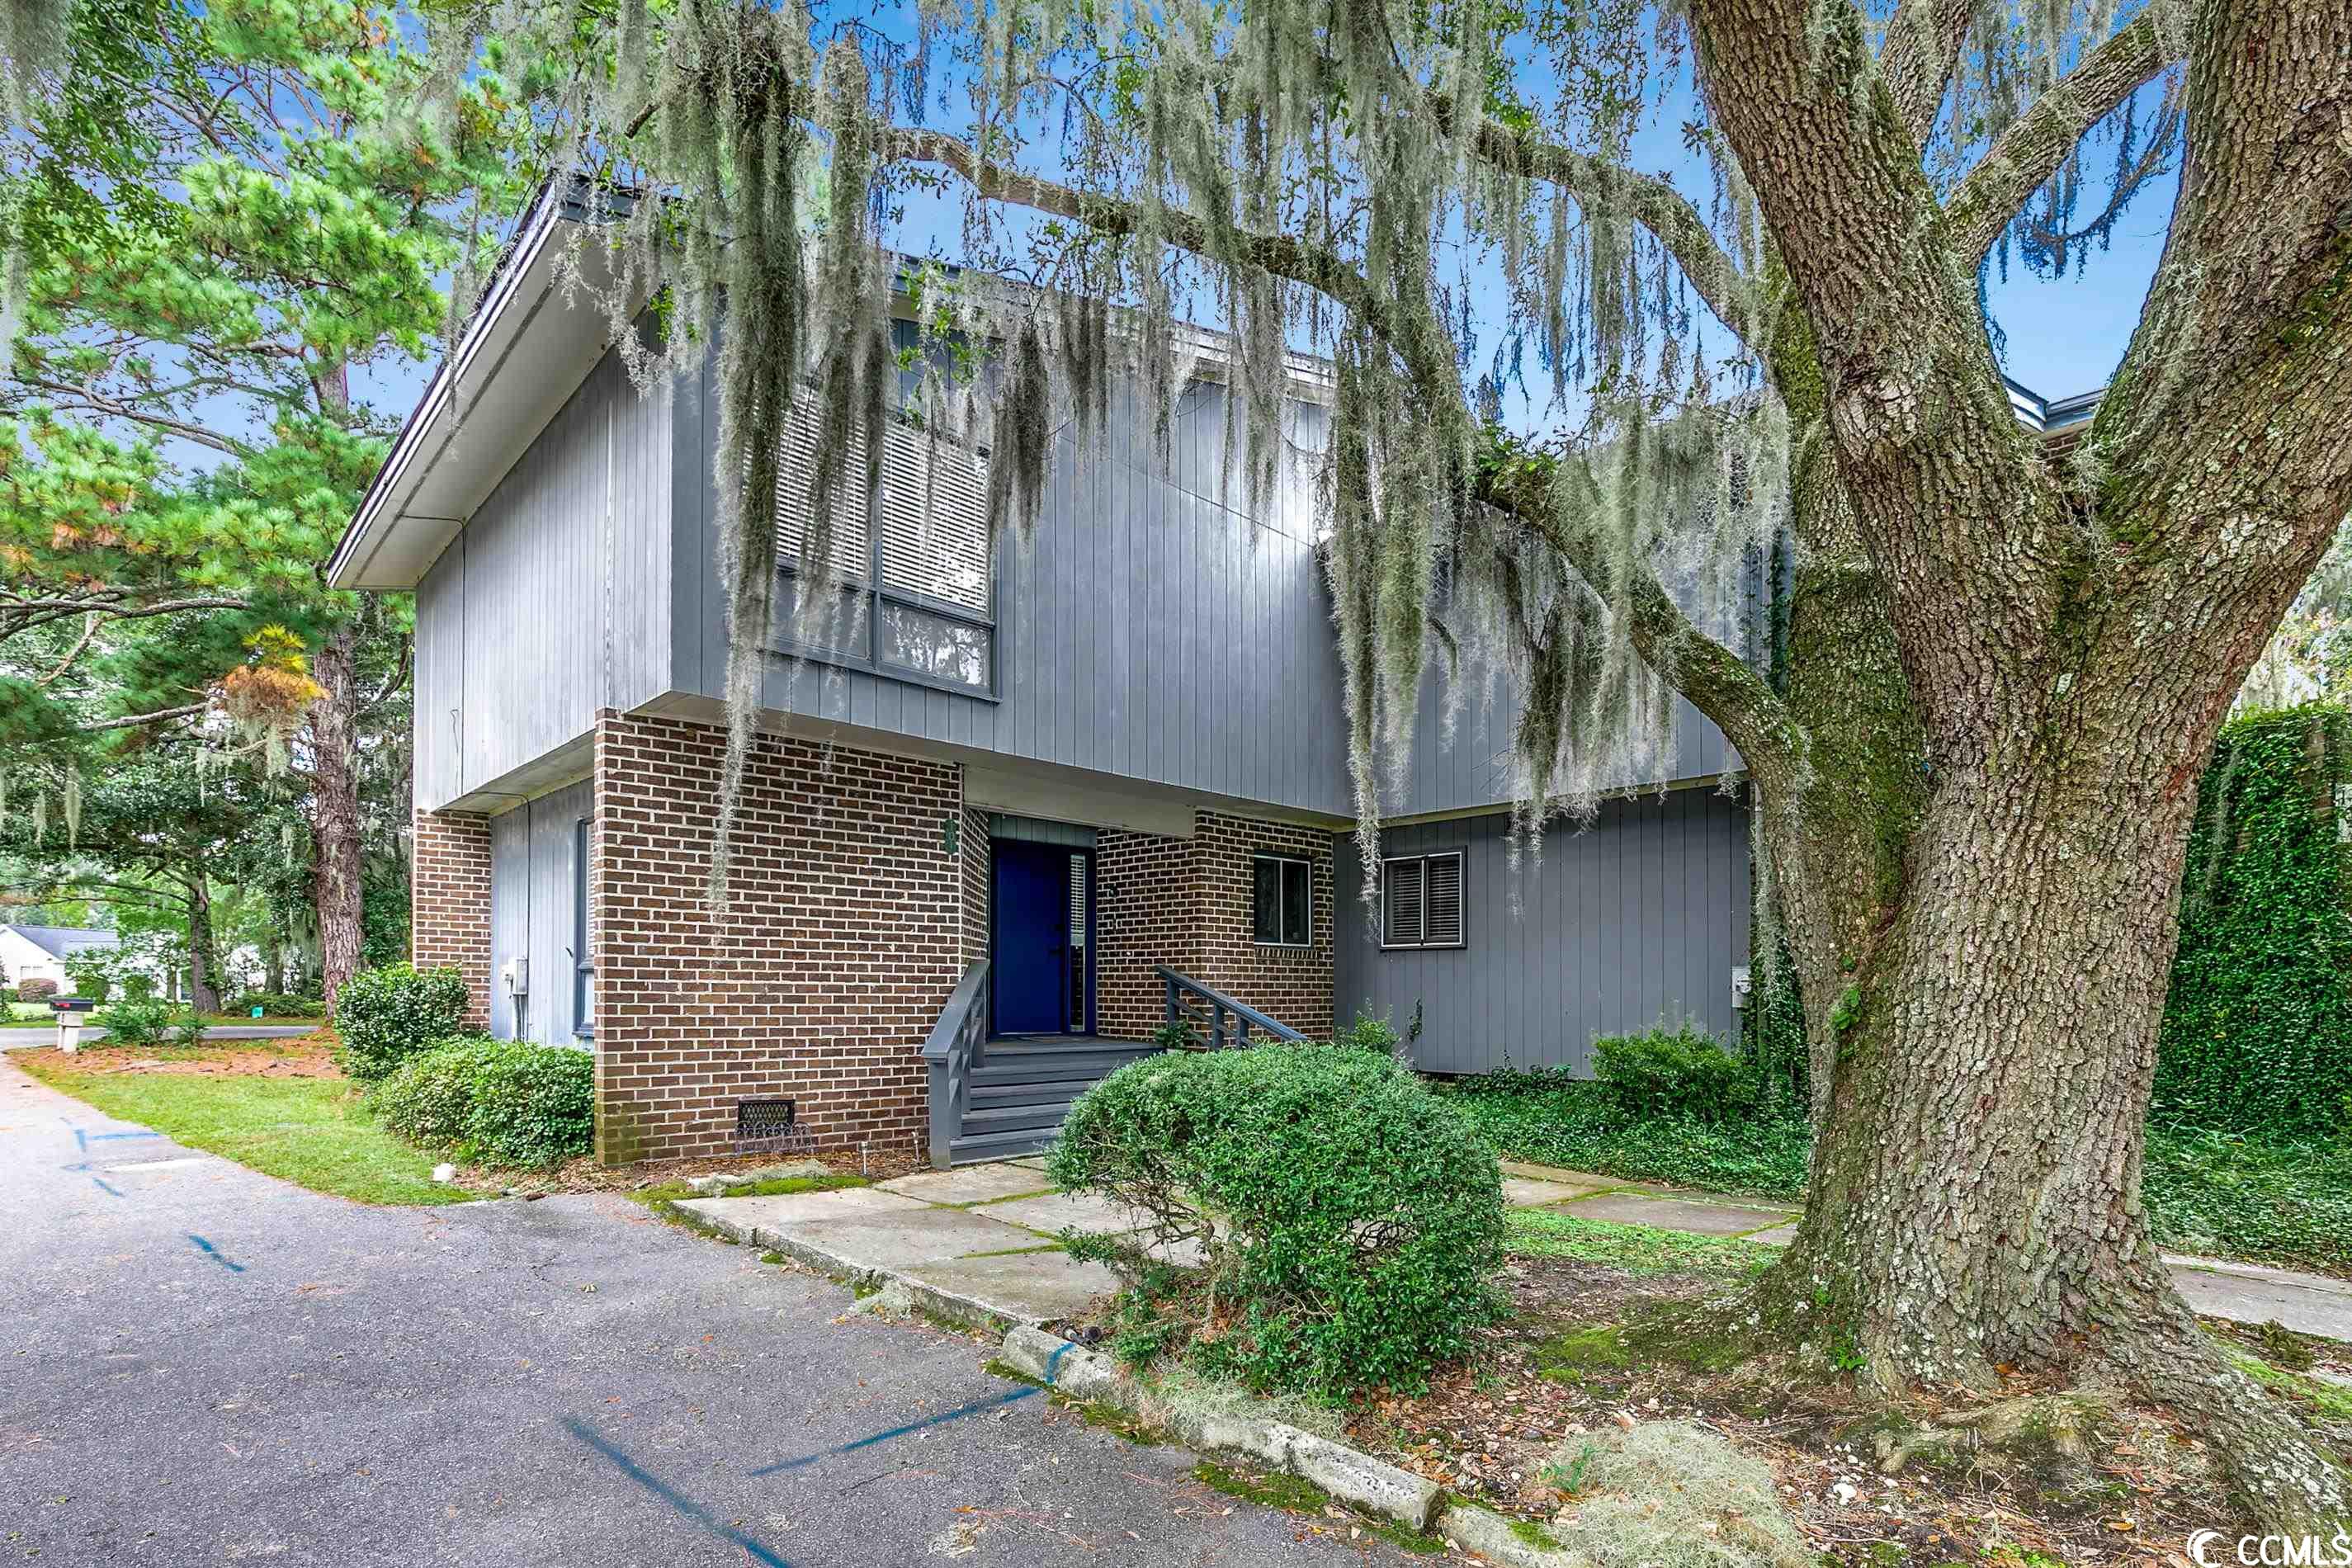 welcome to wedgefield plantation in historic georgetown, sc. this 3 bedroom, 3 bath condo has a unique 70's and 80's retro design. nice room sizes with full wall length windows throughout. large open family room & dining room. french doors open to a large 30x9 screen porch overlooking an open landscape surrounded by true old south moss draped oak trees. 3 bedrooms upstairs plus home office on main floor level. owner's suite has private screened balcony overlooking the large private backyard. the property borders the old ricefields of long ago along the black river. situated within the wedgefield country club with beautiful golf course and clubhouse and wedgefield community boat landing. near shopping, hospital, grocery and more. only minutes to the historic district and downtown area with waterfront dining and shops along the georgetown harbor walk. georgetown borders the winyah bay. several rivers converge at the bay to provide access to scenic boating opportunities; and some of the best salt & fresh water fishing along the south carolina coast. come enjoy the historic scenery, golfing and all the watersport adventure that georgetown, sc has to offer. this condo is in need of some updates and will convey in as is condition. it has incredible potential and a quiet private location.  call today to schedule a time to view this home and community.